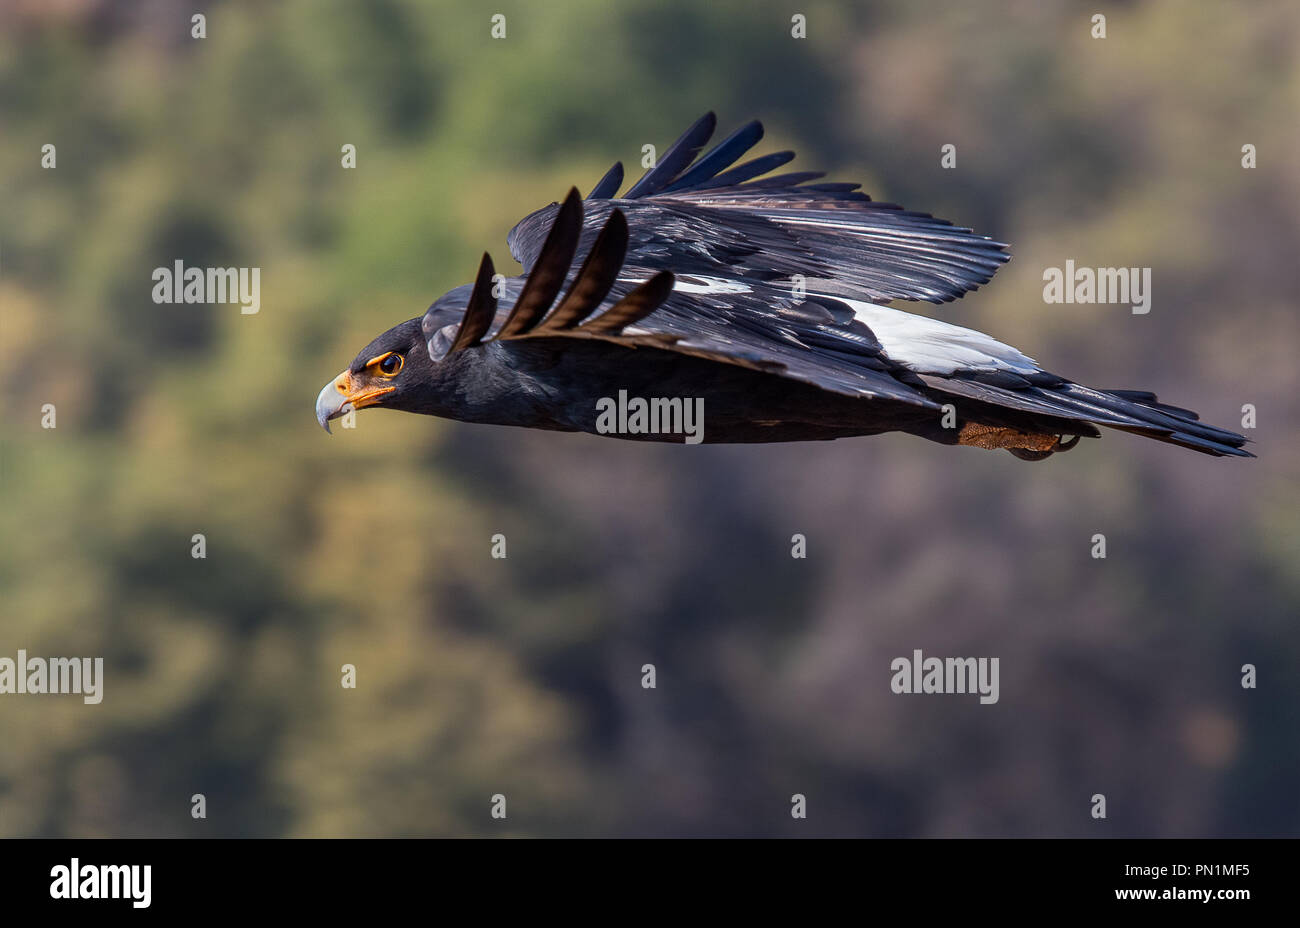 A verreaux eagle in flight. Photograph taken in South Africa Stock Photo